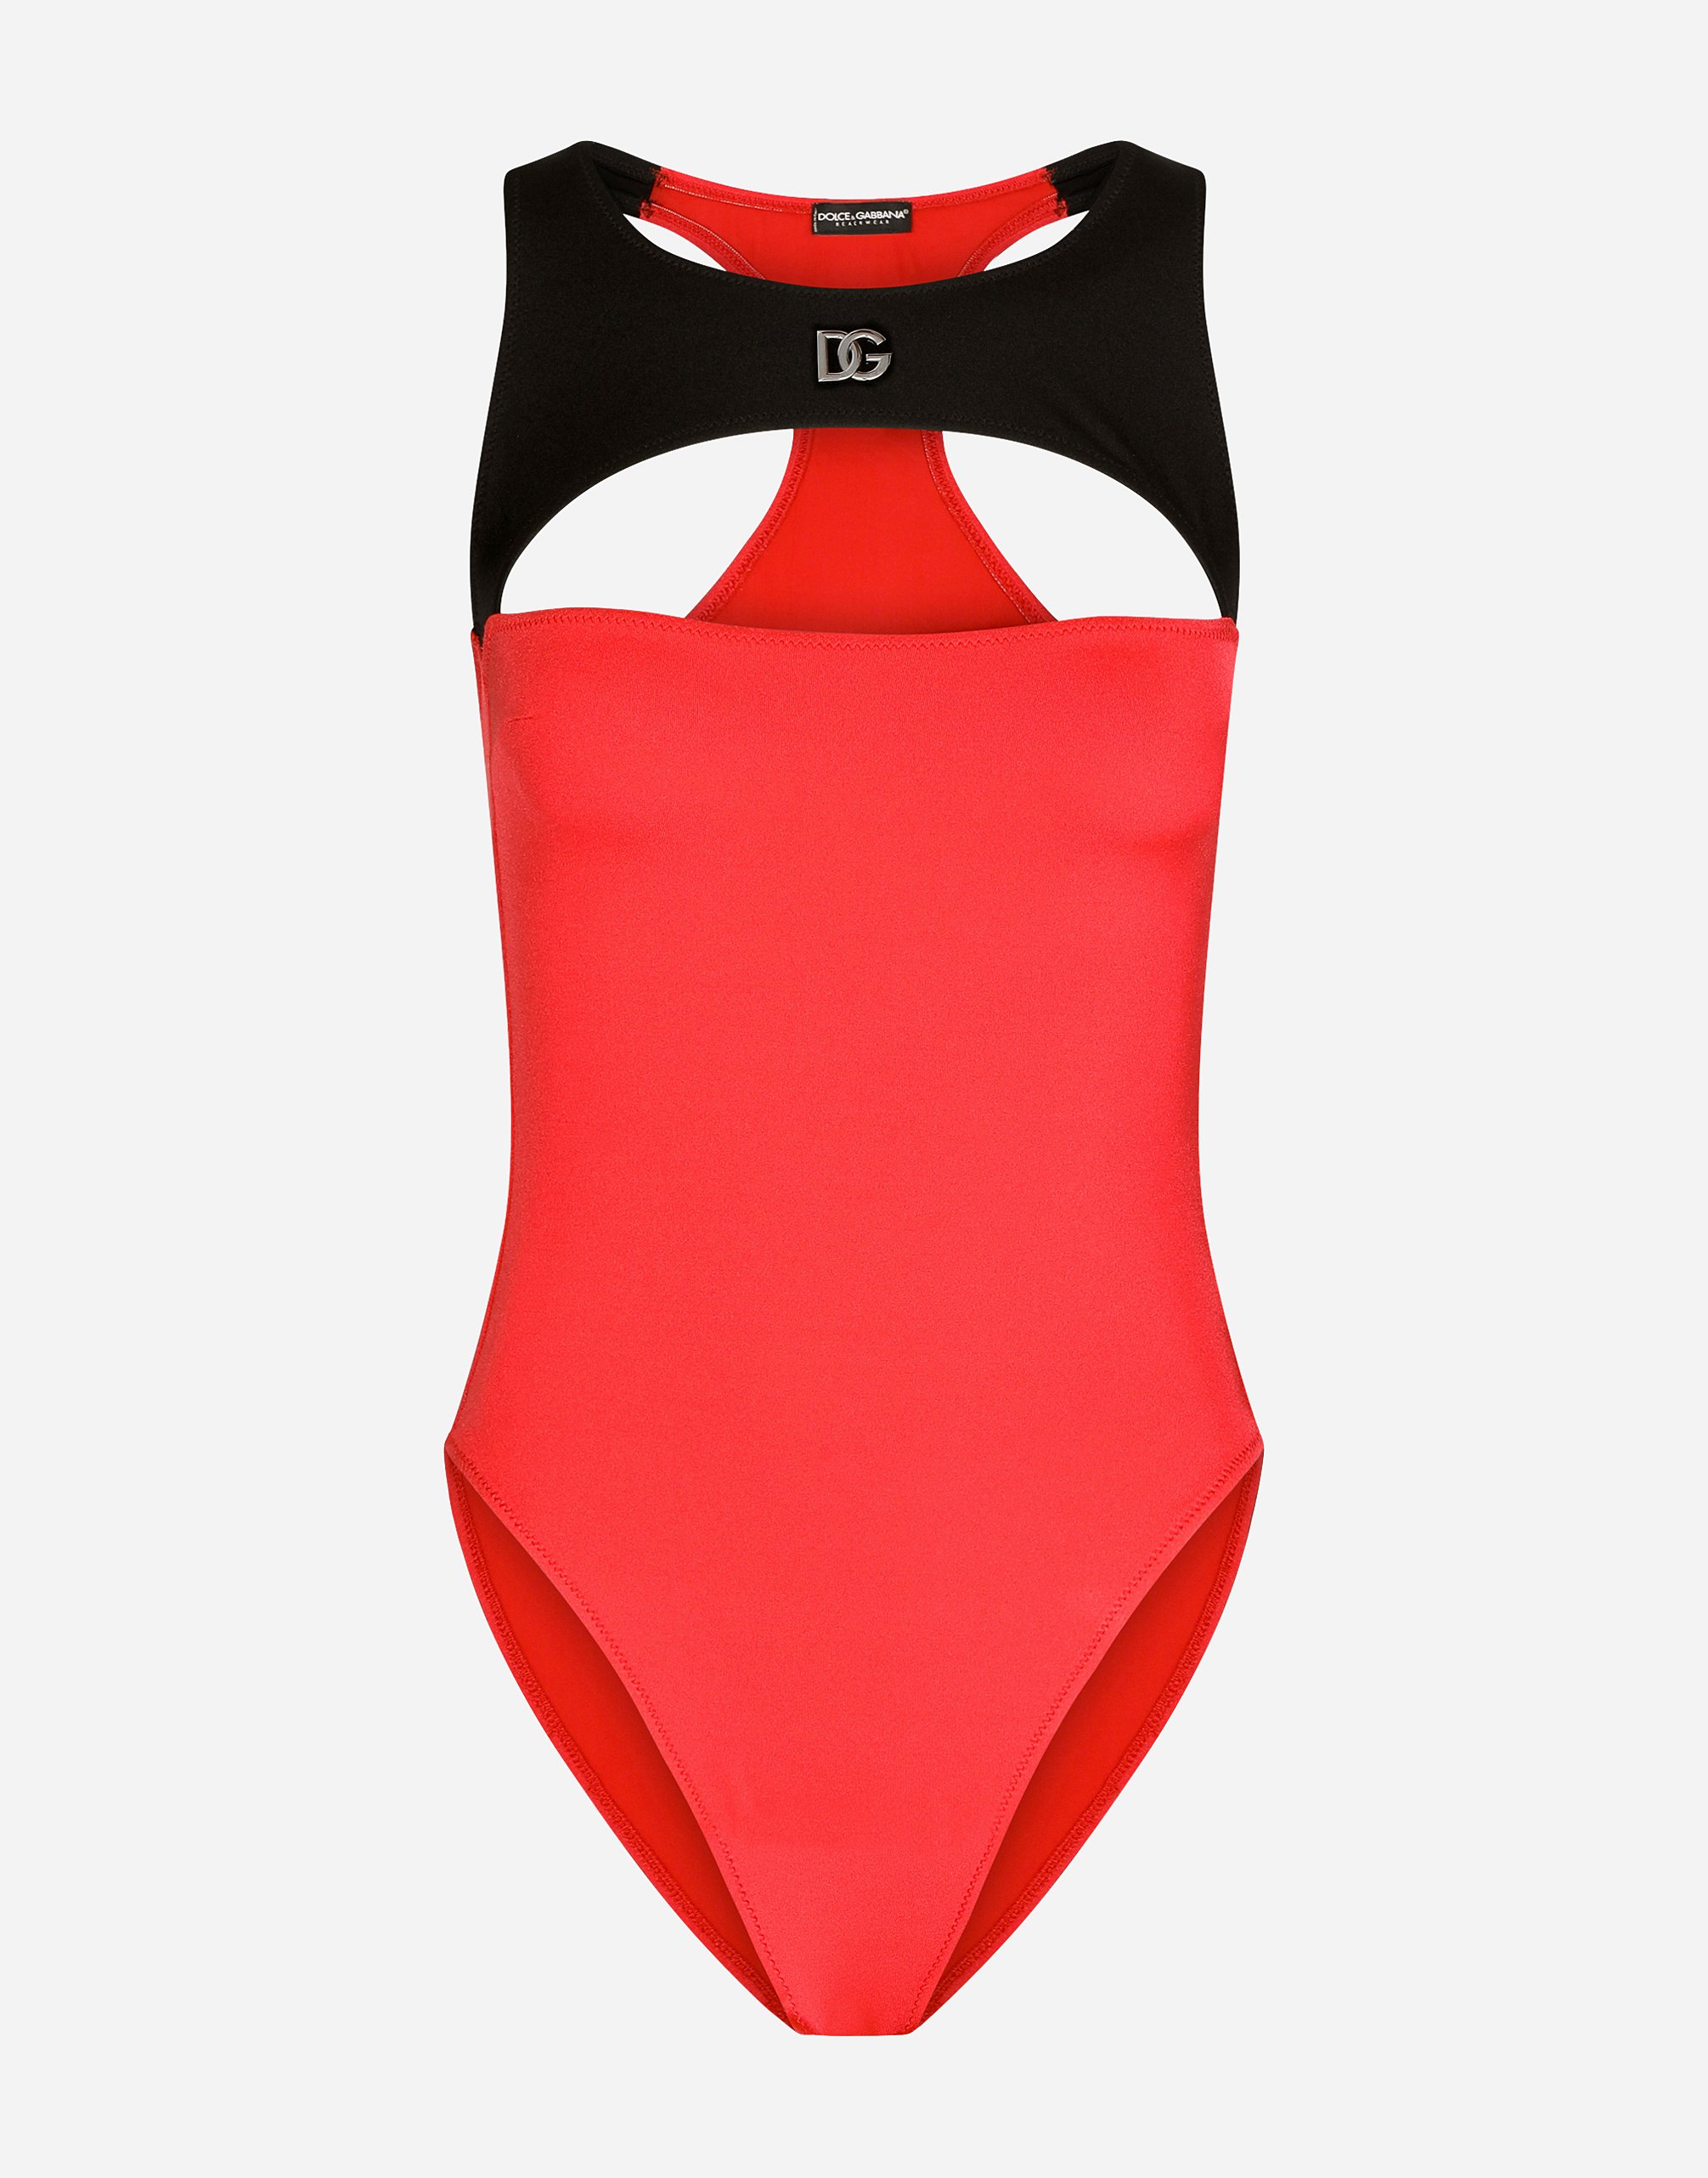 Two-tone racer-style one-piece swimsuit in Red